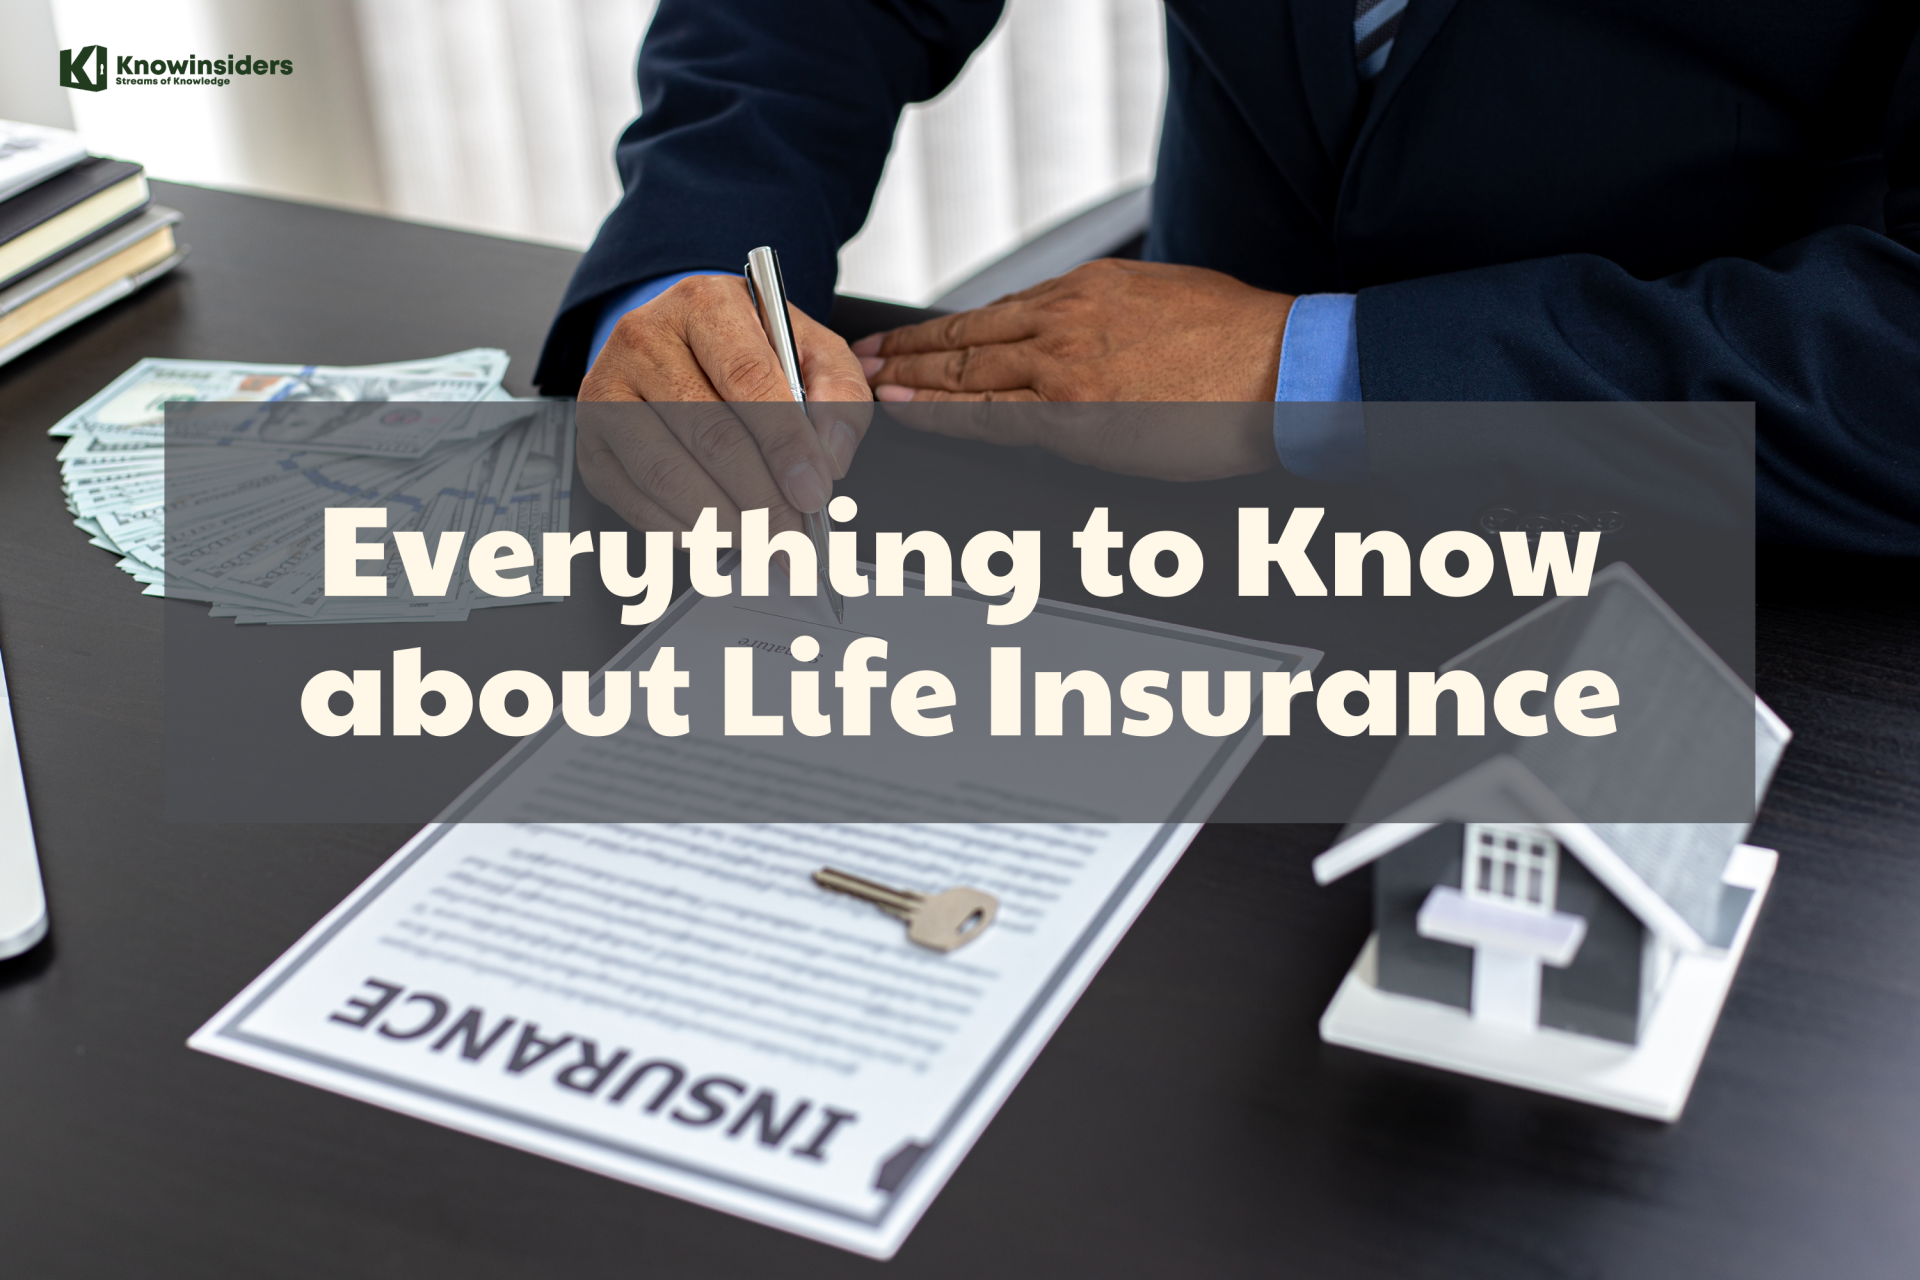 Facts About Life Insurance: Purposes, Types, Benefits and Cost